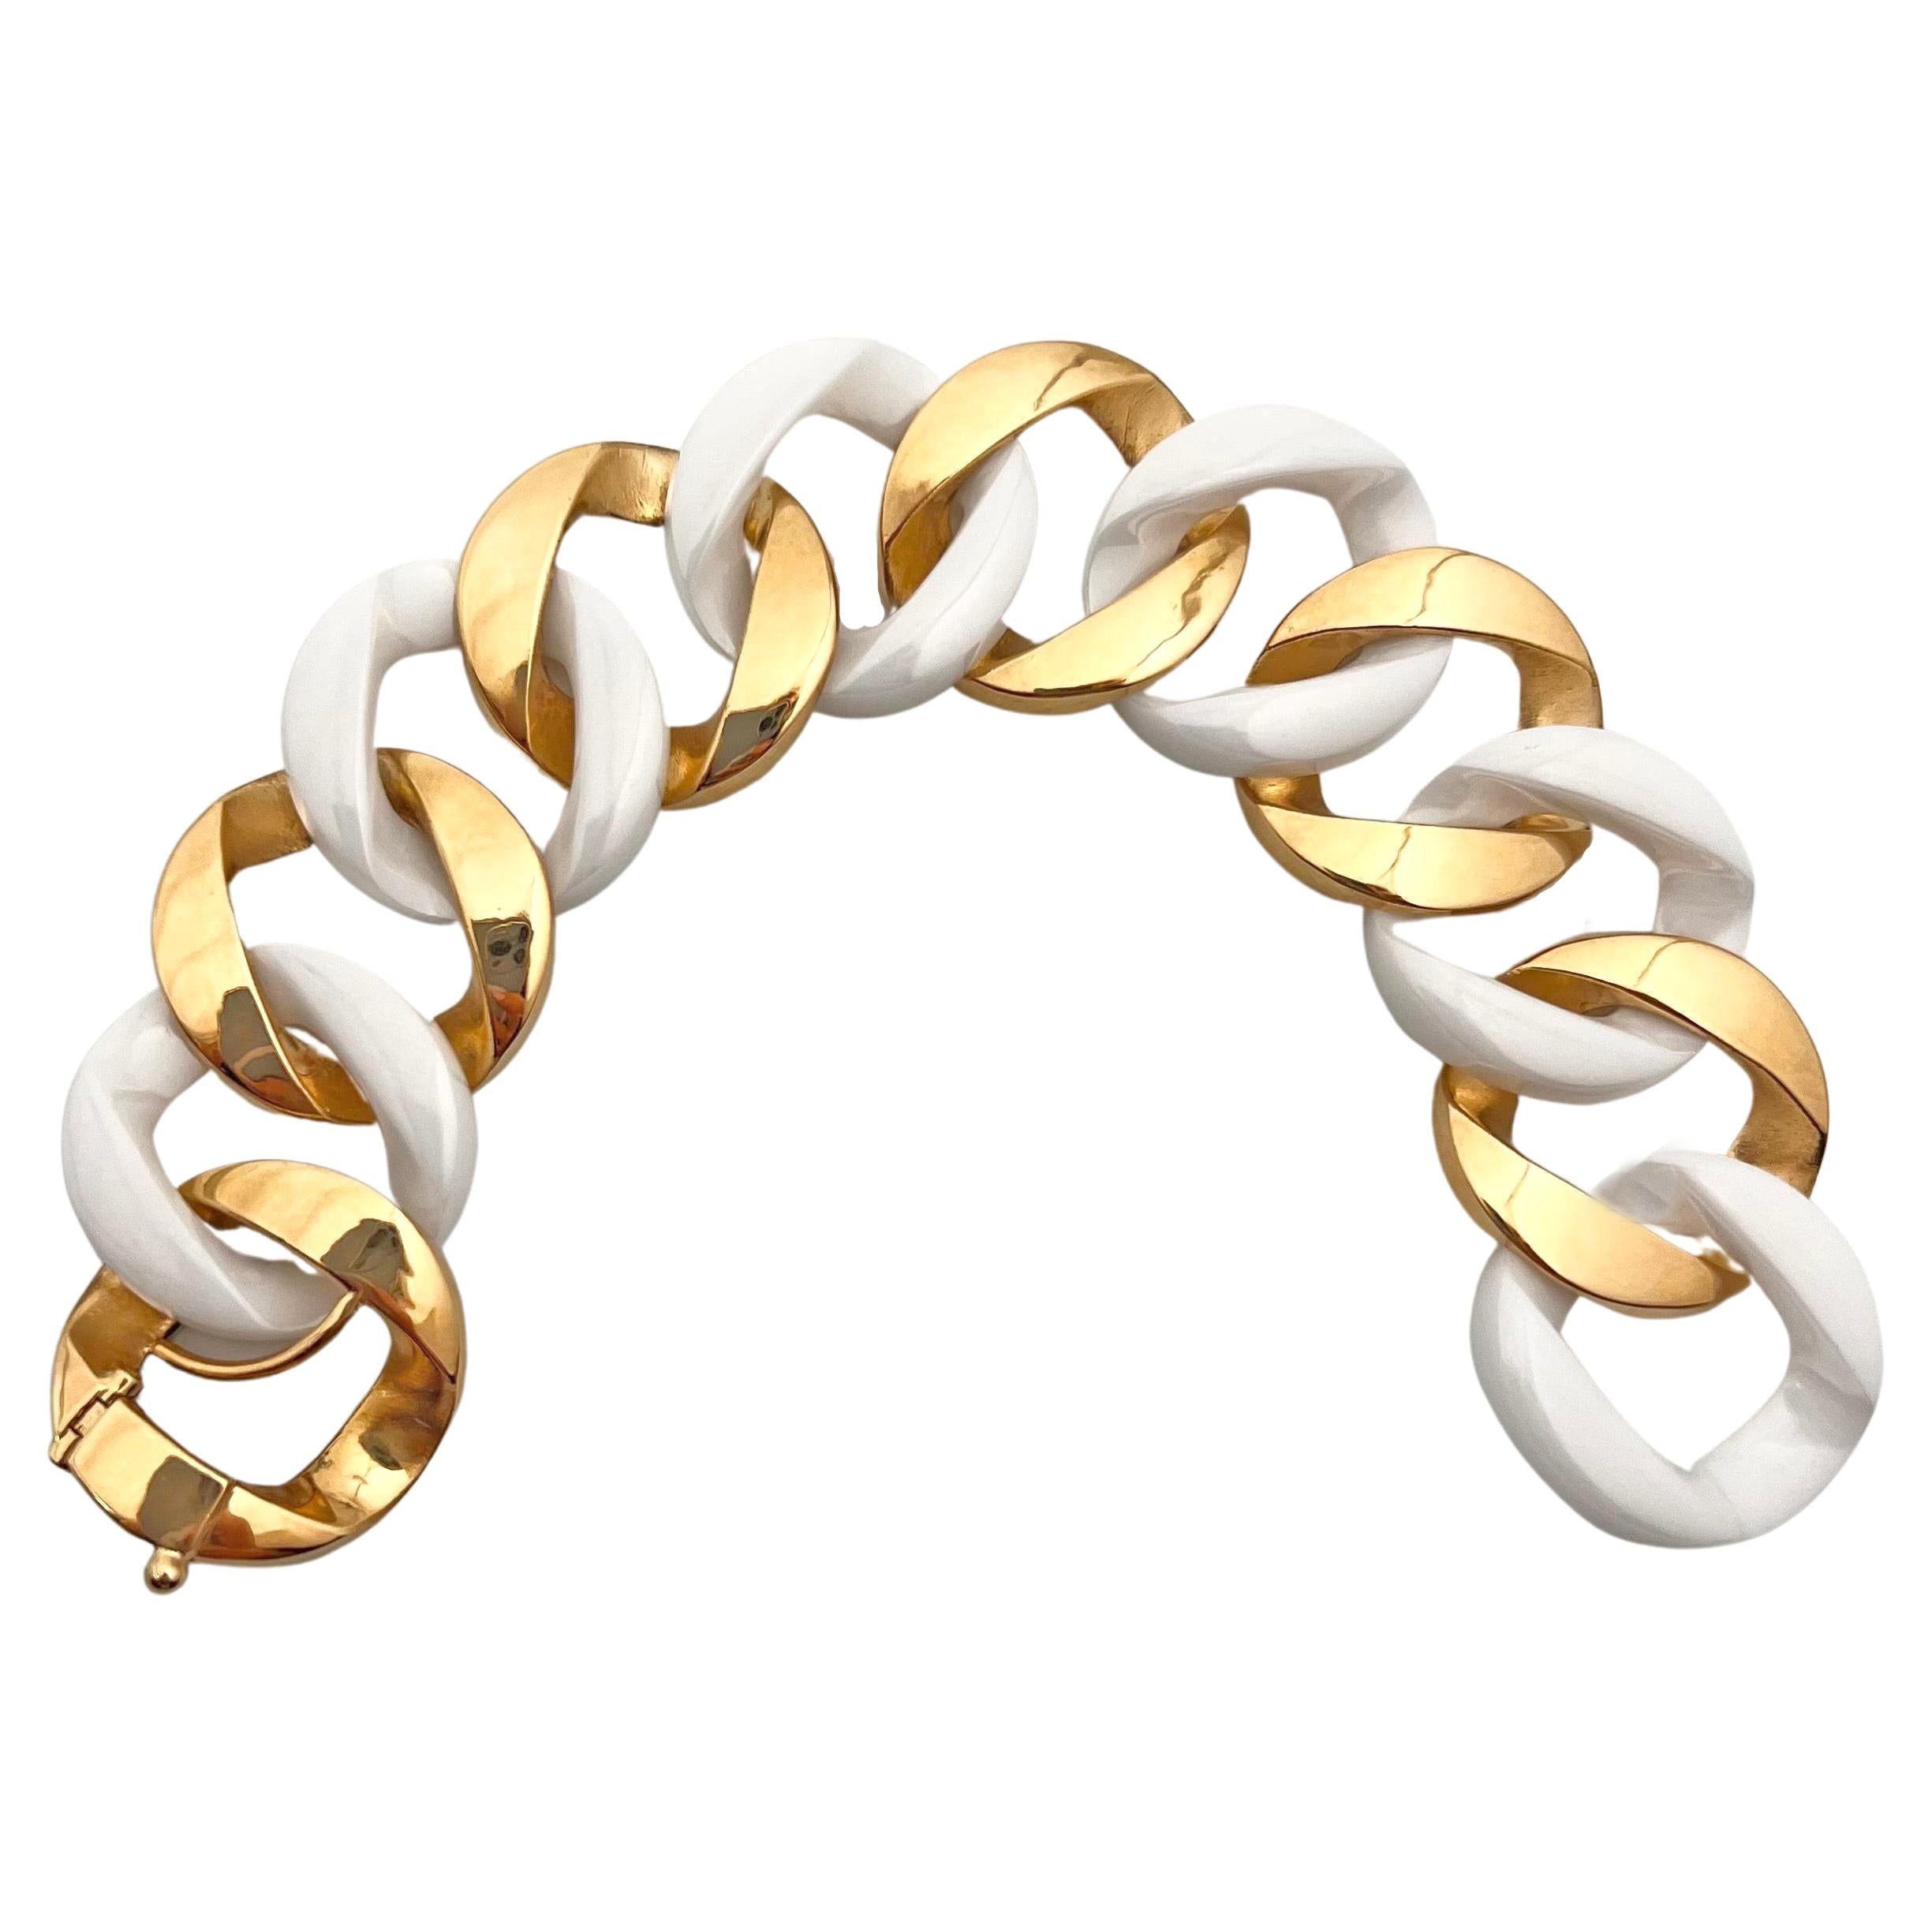 Elevate your style with the undeniable sophistication and timeless beauty of this Verdura 18 karat yellow gold and white ceramic curb-link bracelet. This exquisite piece showcases polished flat gold links alternating with white ceramic links,